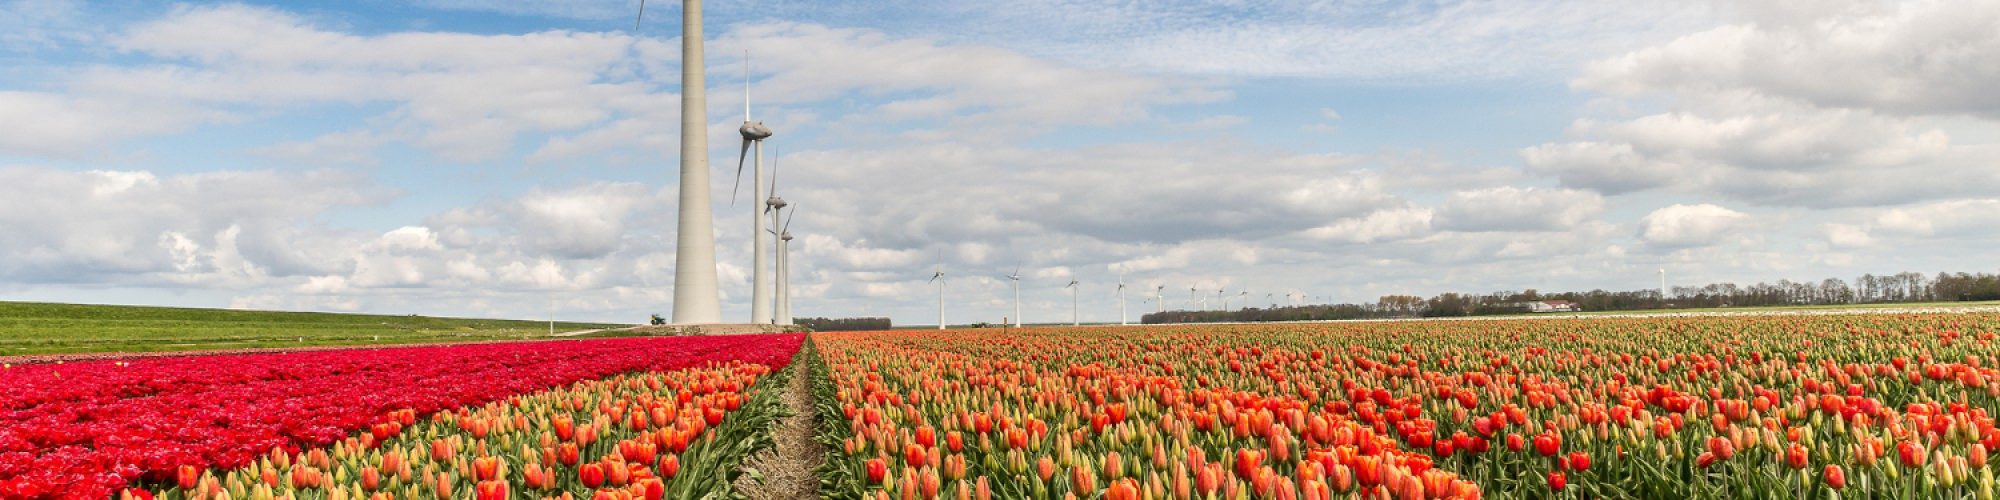 beautiful-shot-different-types-flower-field-with-windmills-distance